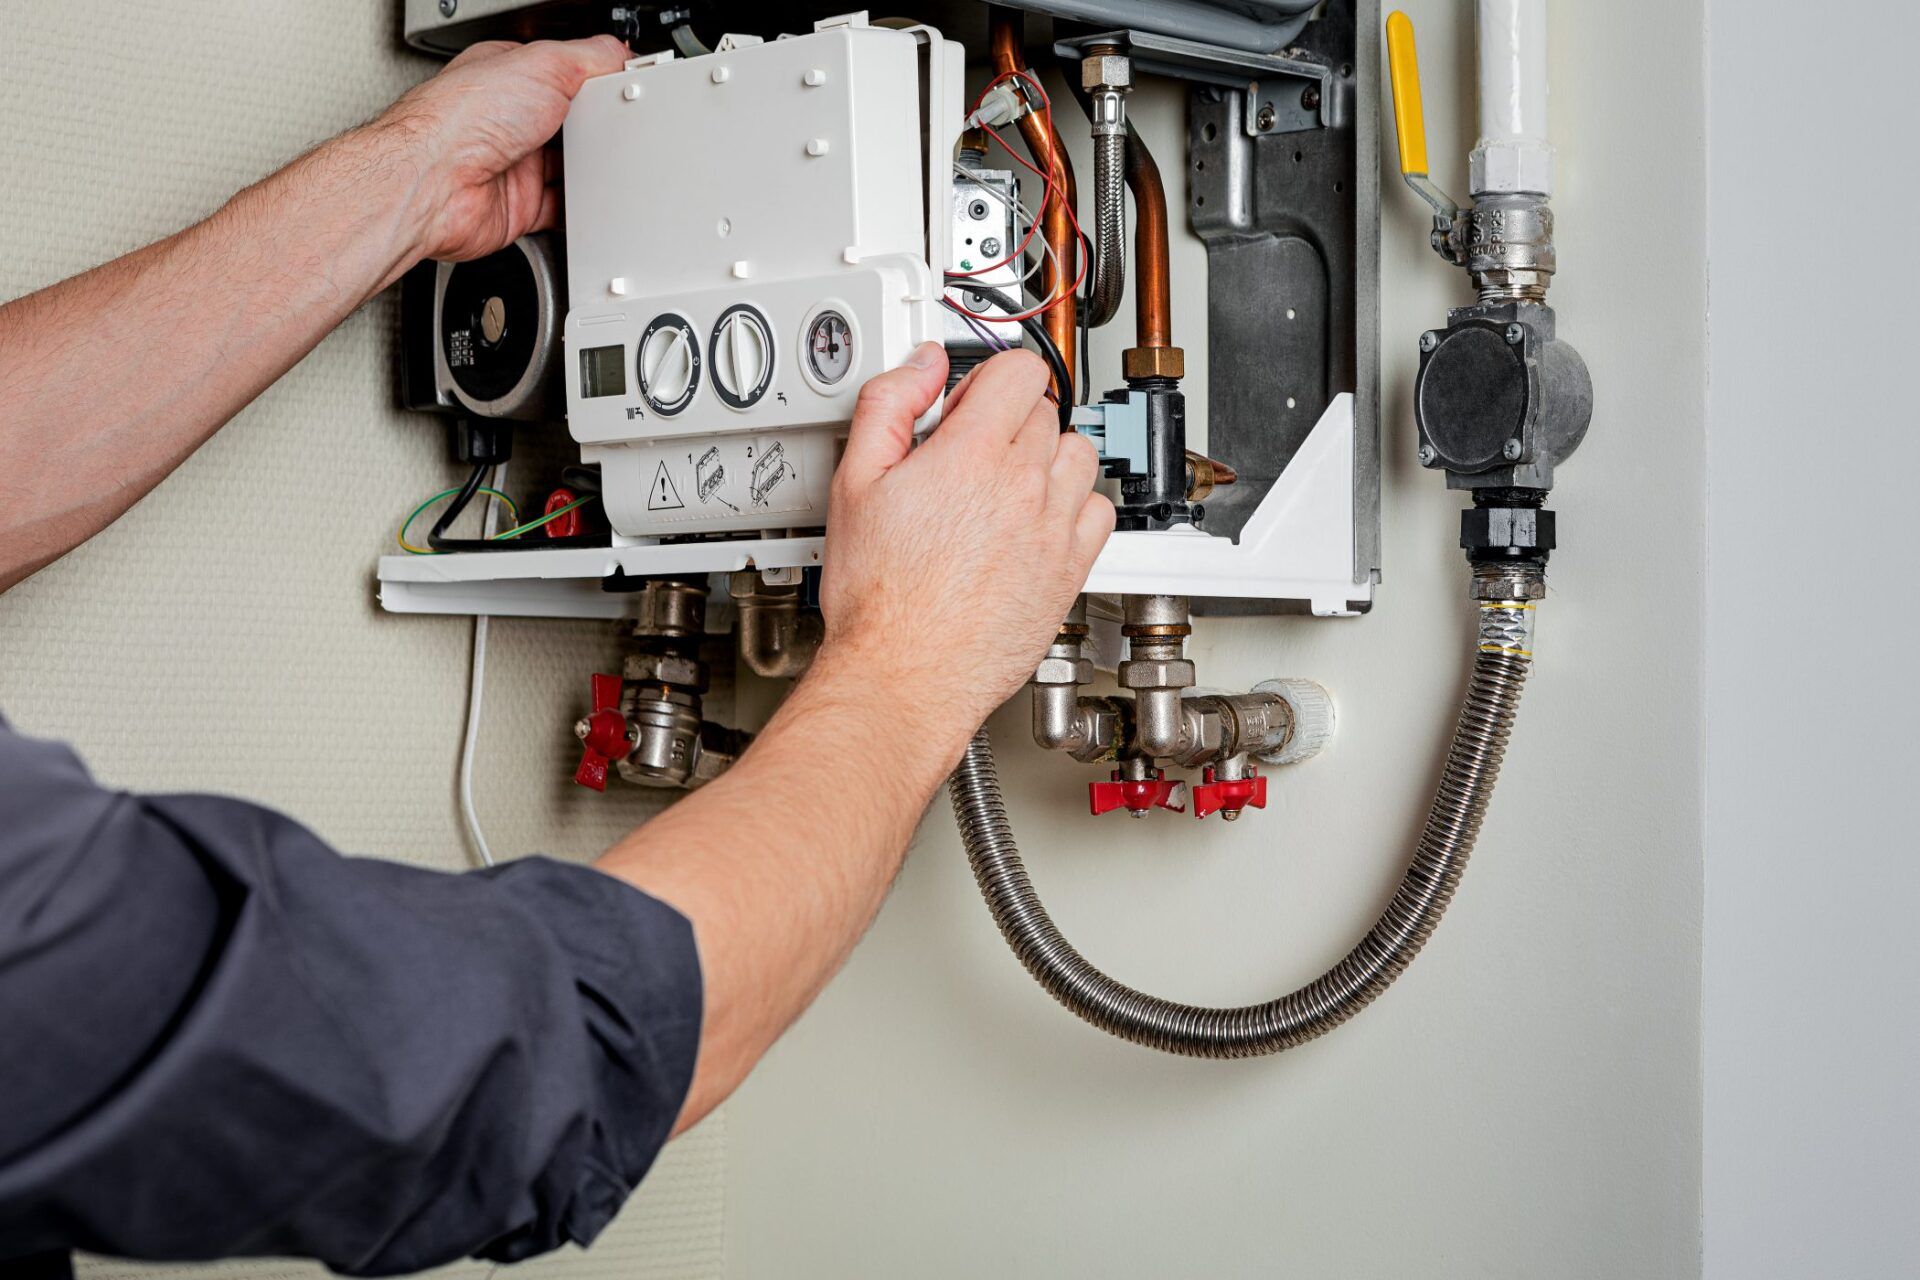 An expert technician performing maintenance and repair on a gas boiler, checking and adjusting various components to ensure optimal functionality and safety.